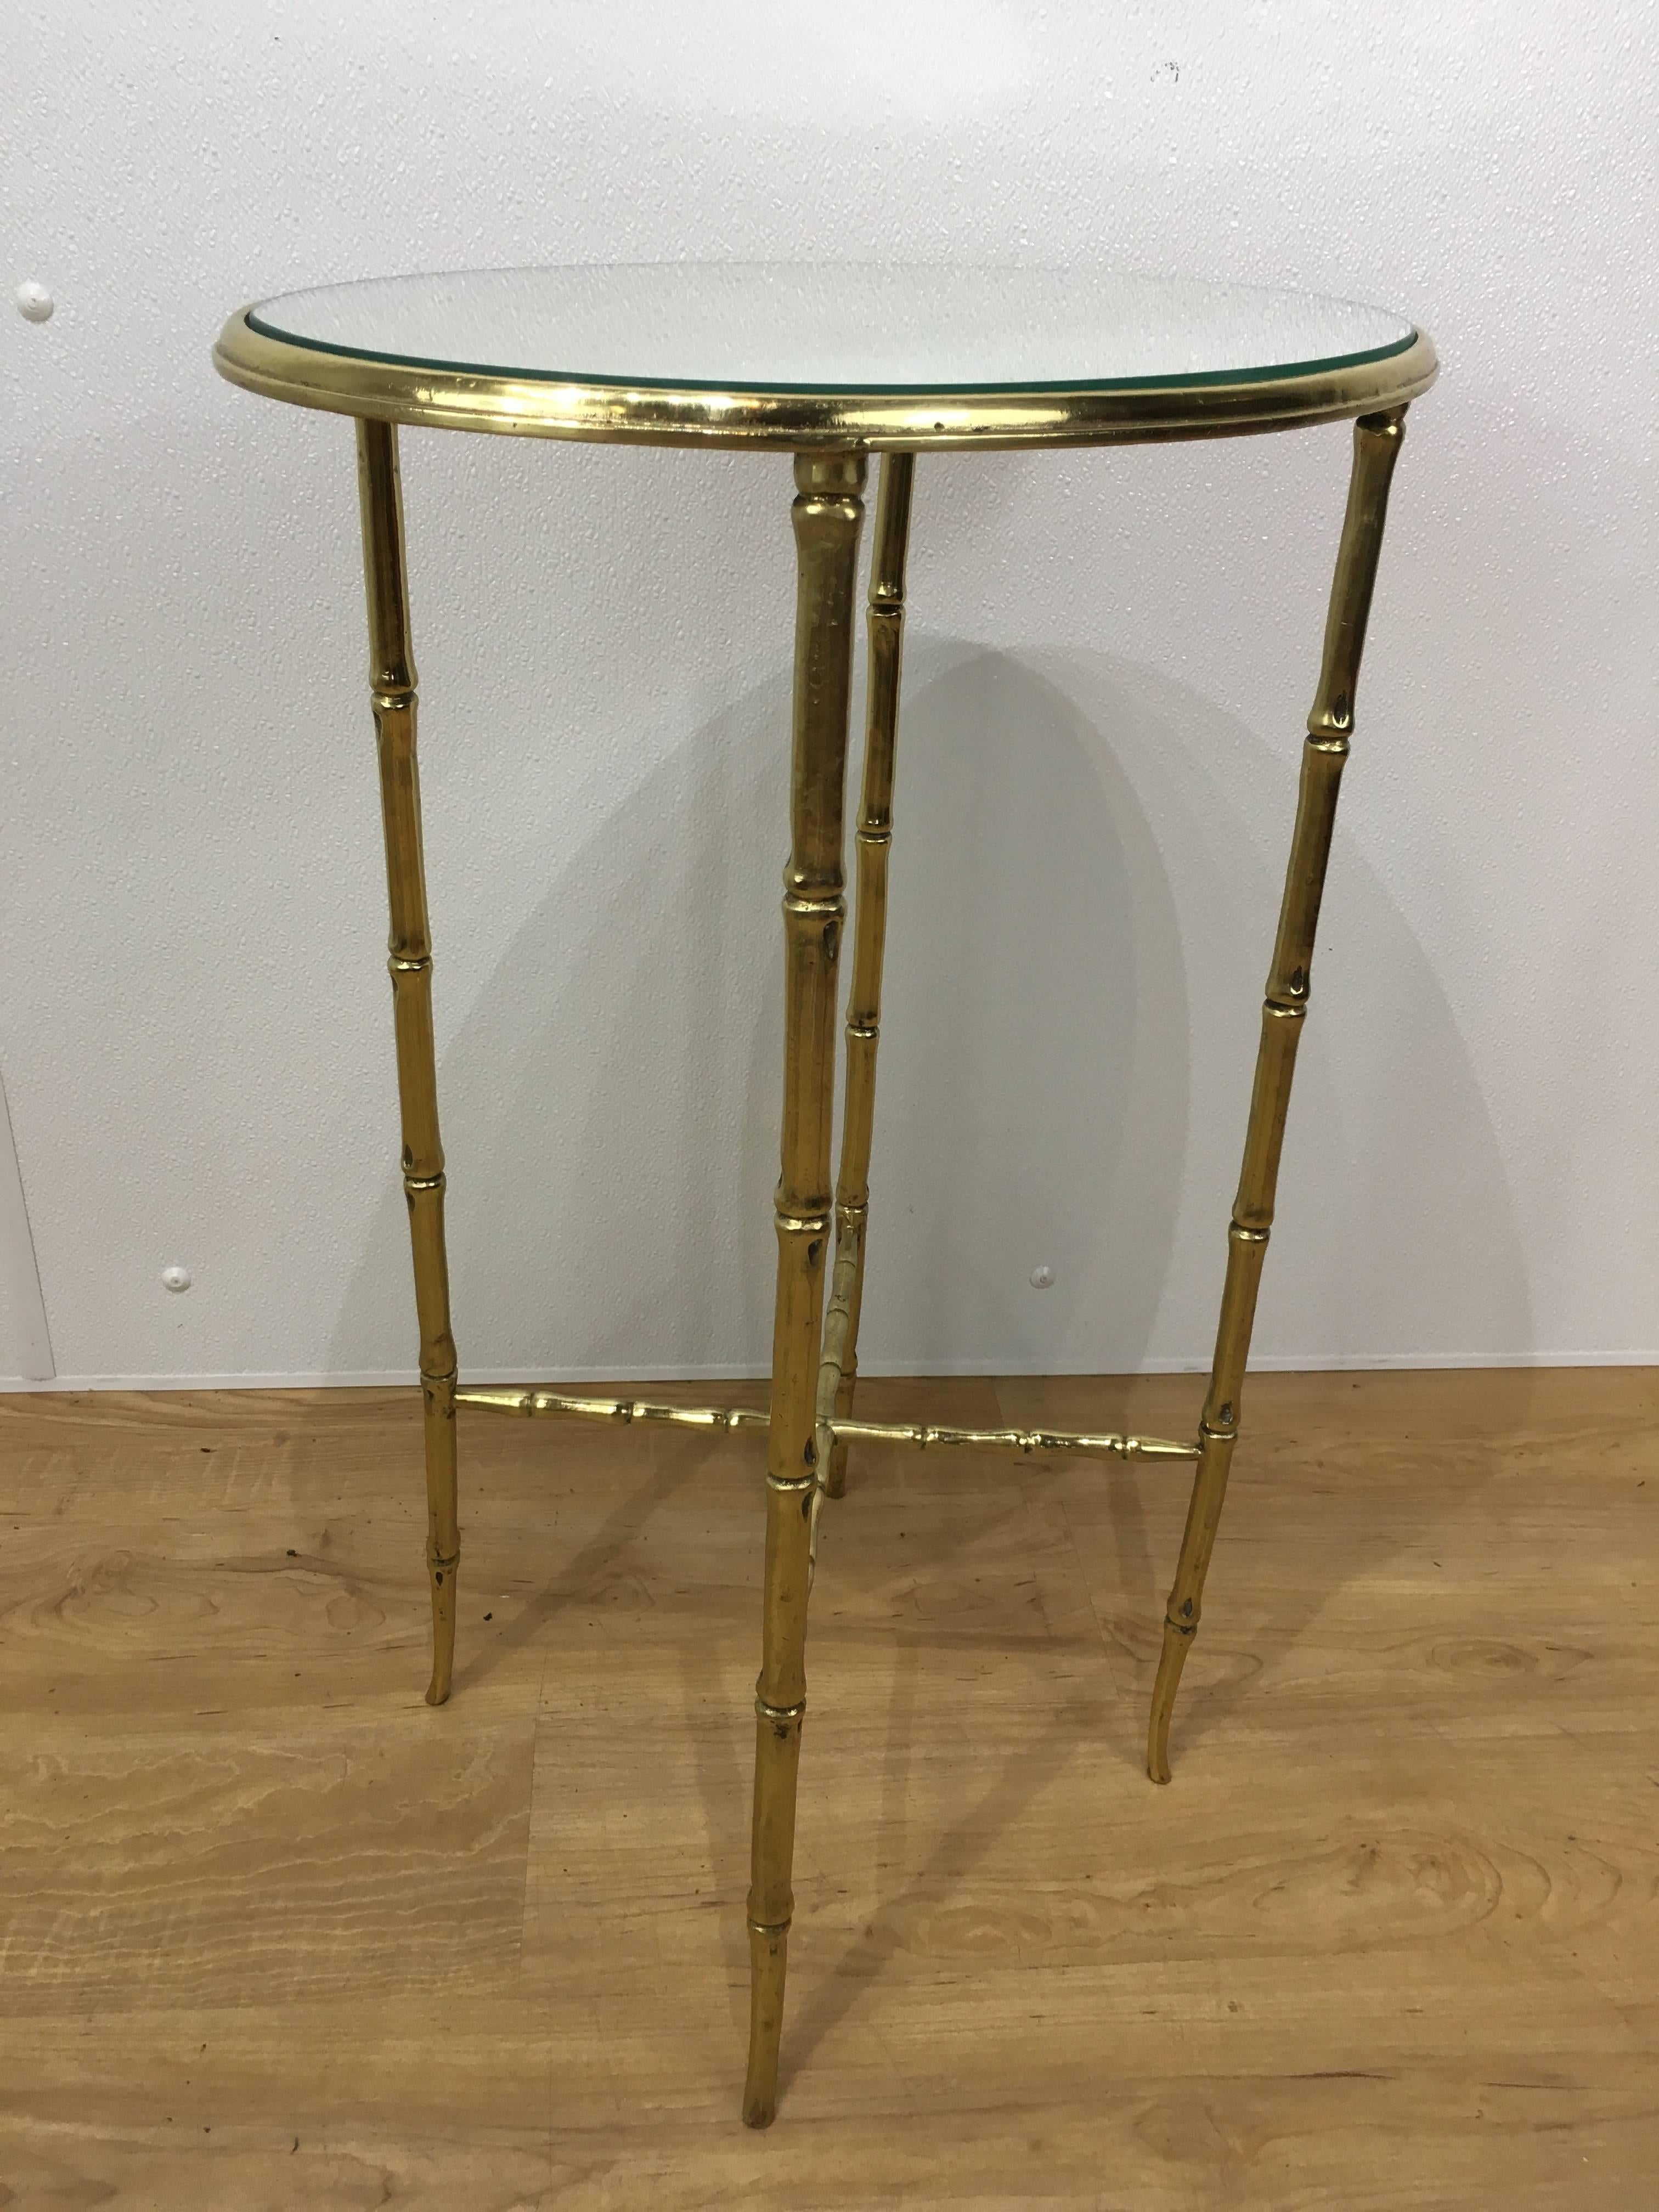 Elegant bamboo motif brass side table, finely cast with oval mirror top on conforming bamboo motif base.